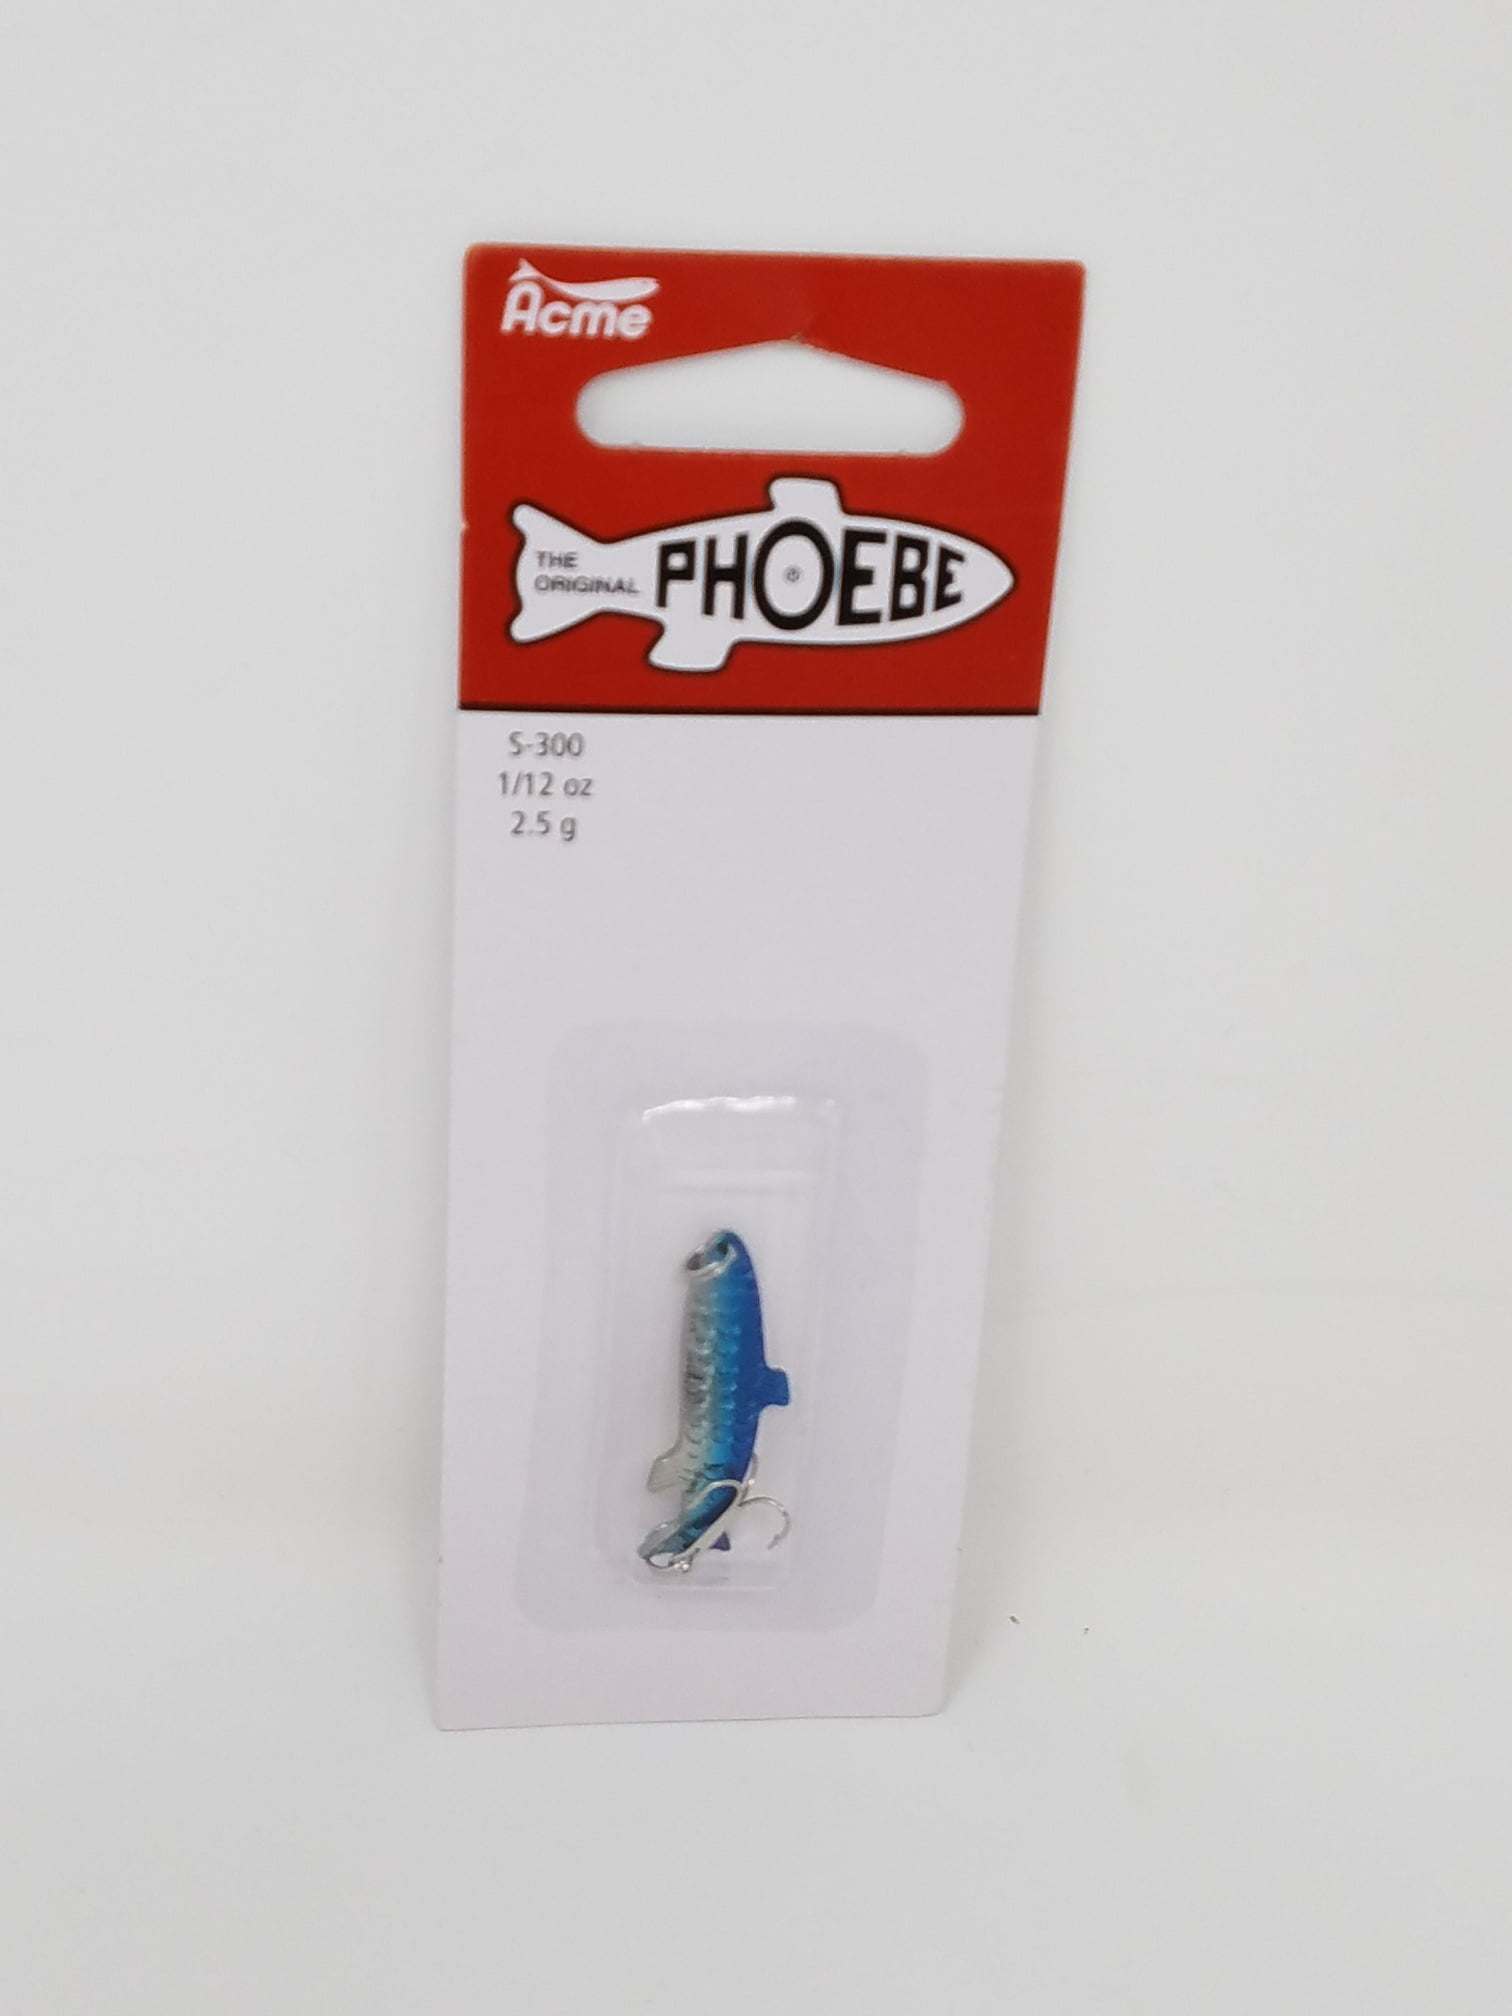 Acme Tackle Phoebe, Fishing Lure Spoon Gold 1/12 oz. 